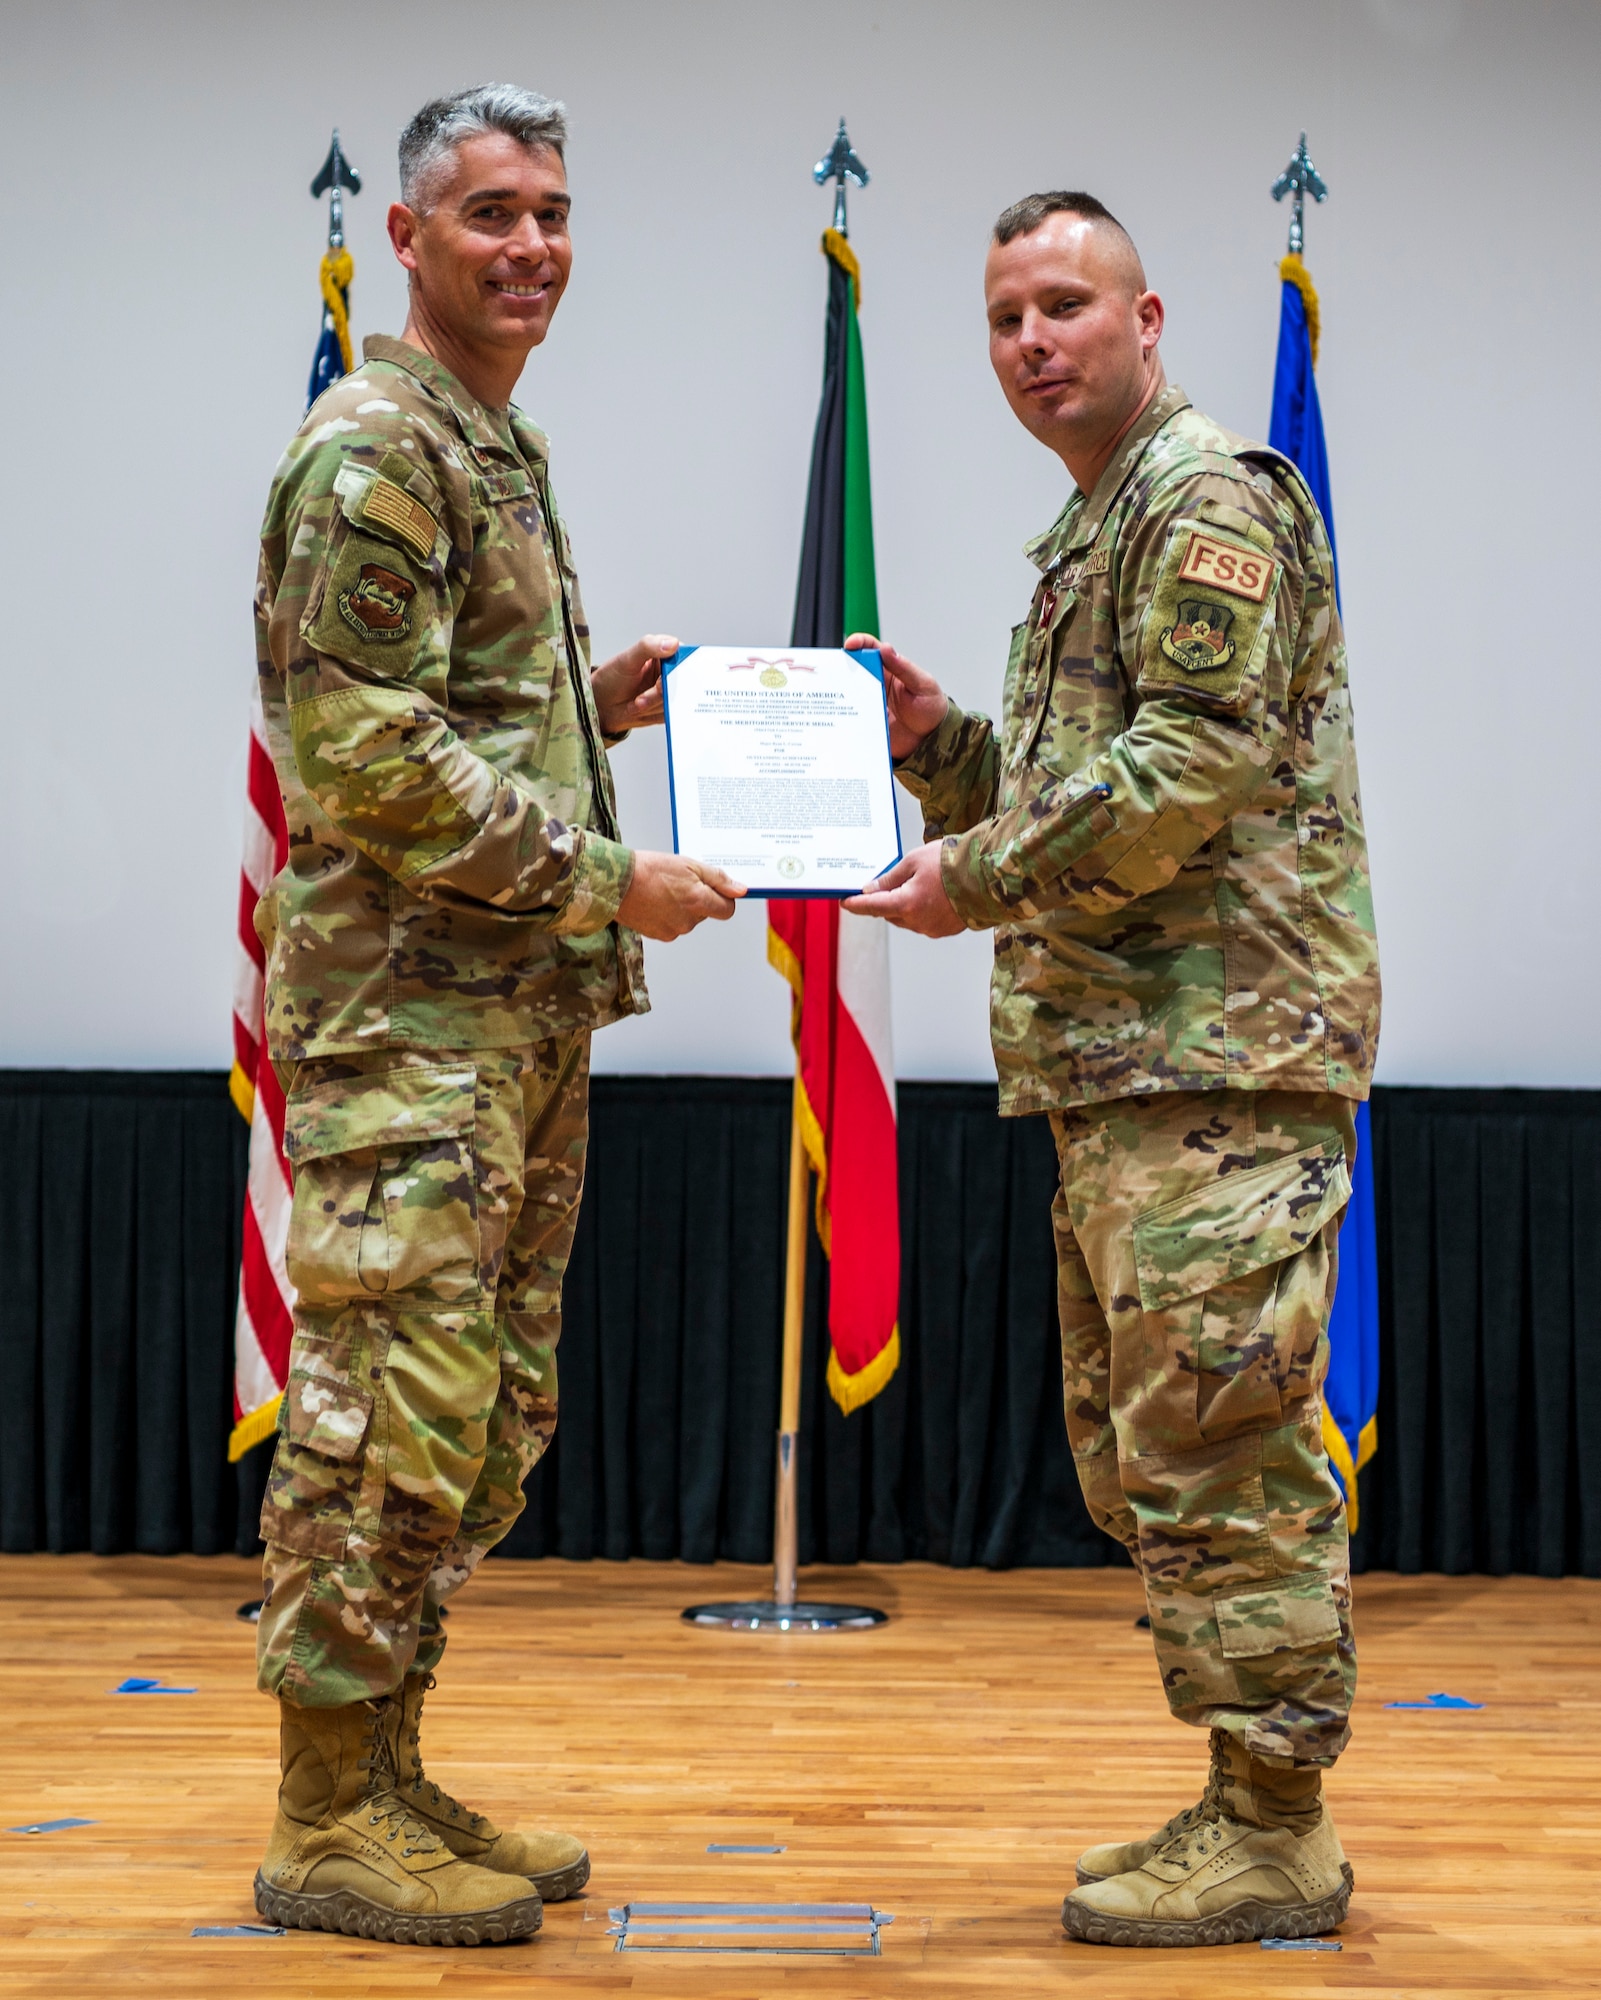 Col. George Buch, Jr., 386th Air Expeditionary Wing commander, presents a Meritorious Service Medal to Maj. Ryan Curran, outgoing 386th Expeditionary Force Support Squadron commander, during a change of command ceremony at Ali Al Salem Air Base, Kuwait, June 8, 2023